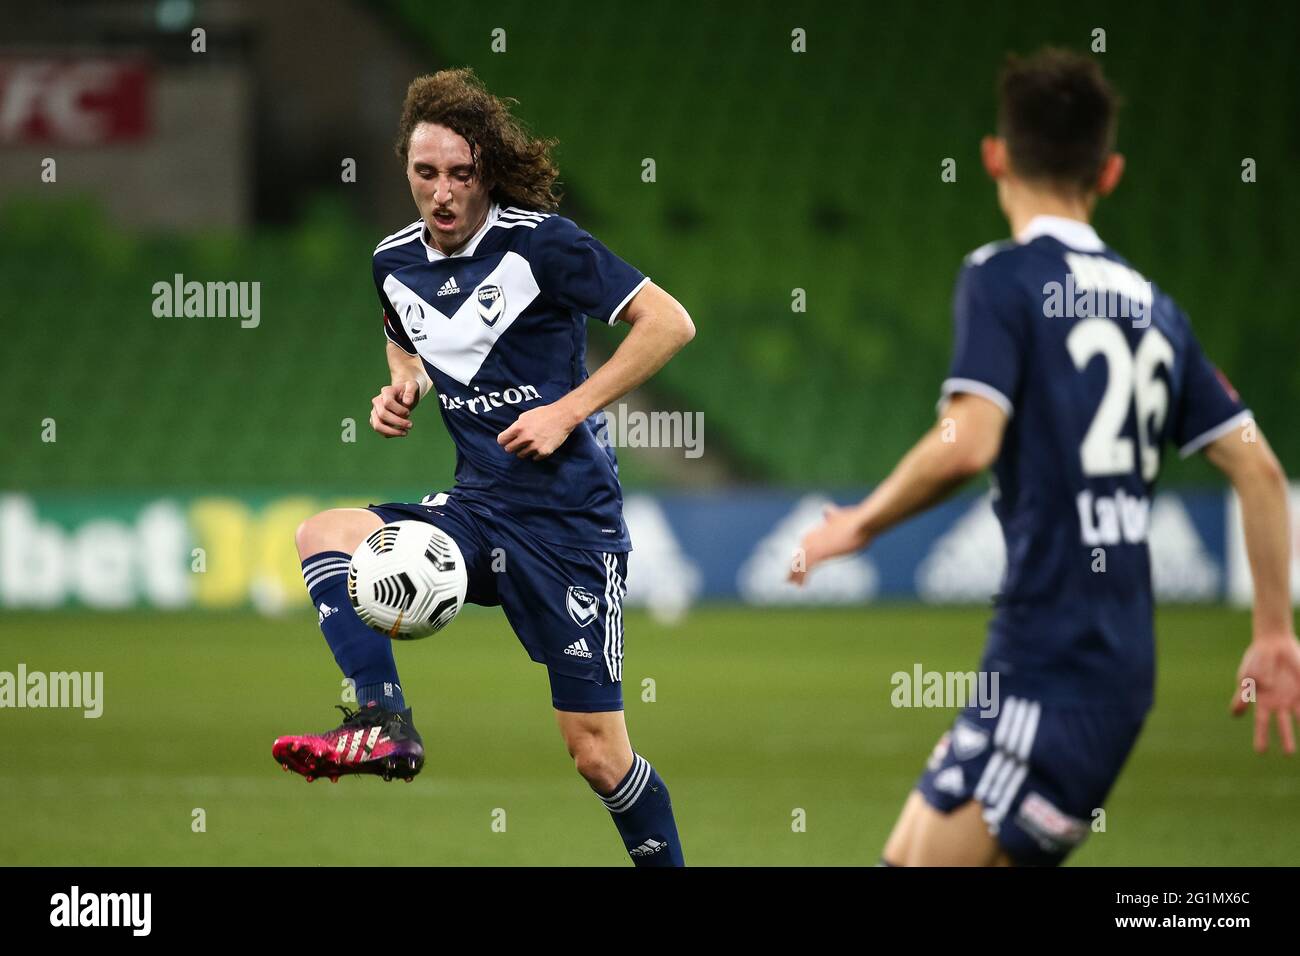 Melbourne, Australia, 6 June, 2021. Jay Barnett of Melbourne Victory kicks the ball during Round 24 of the Melbourne Victory v Melbourne City FC A-League match, Australia. Credit: Dave Hewison/Alamy Live News Stock Photo